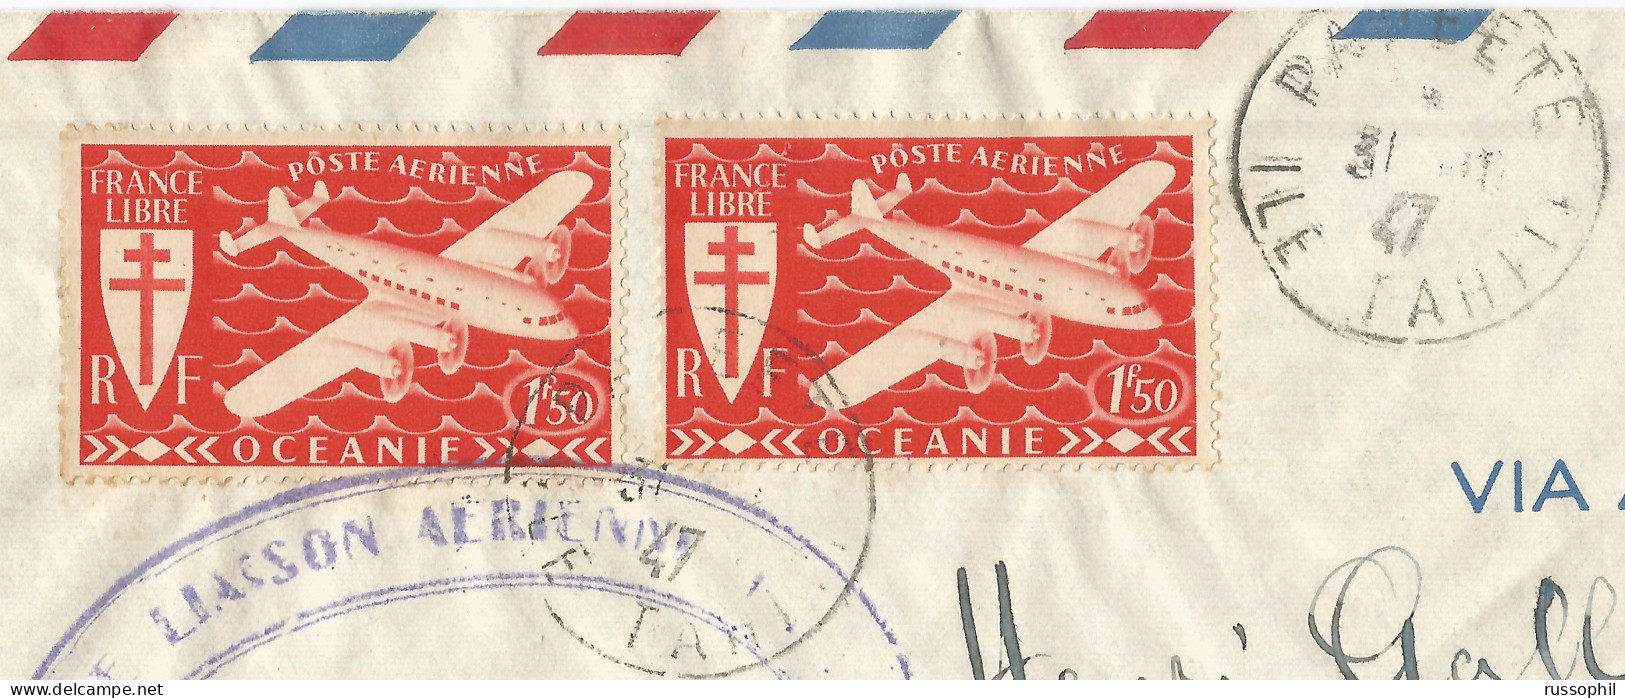 OCEANIE -  TRAPAS - 3 FR. FRANKING ON AIR COVER FROM PAPEETE TO NEW CALEDONIA - RETURNED TO SENDER - 1947 - Brieven En Documenten